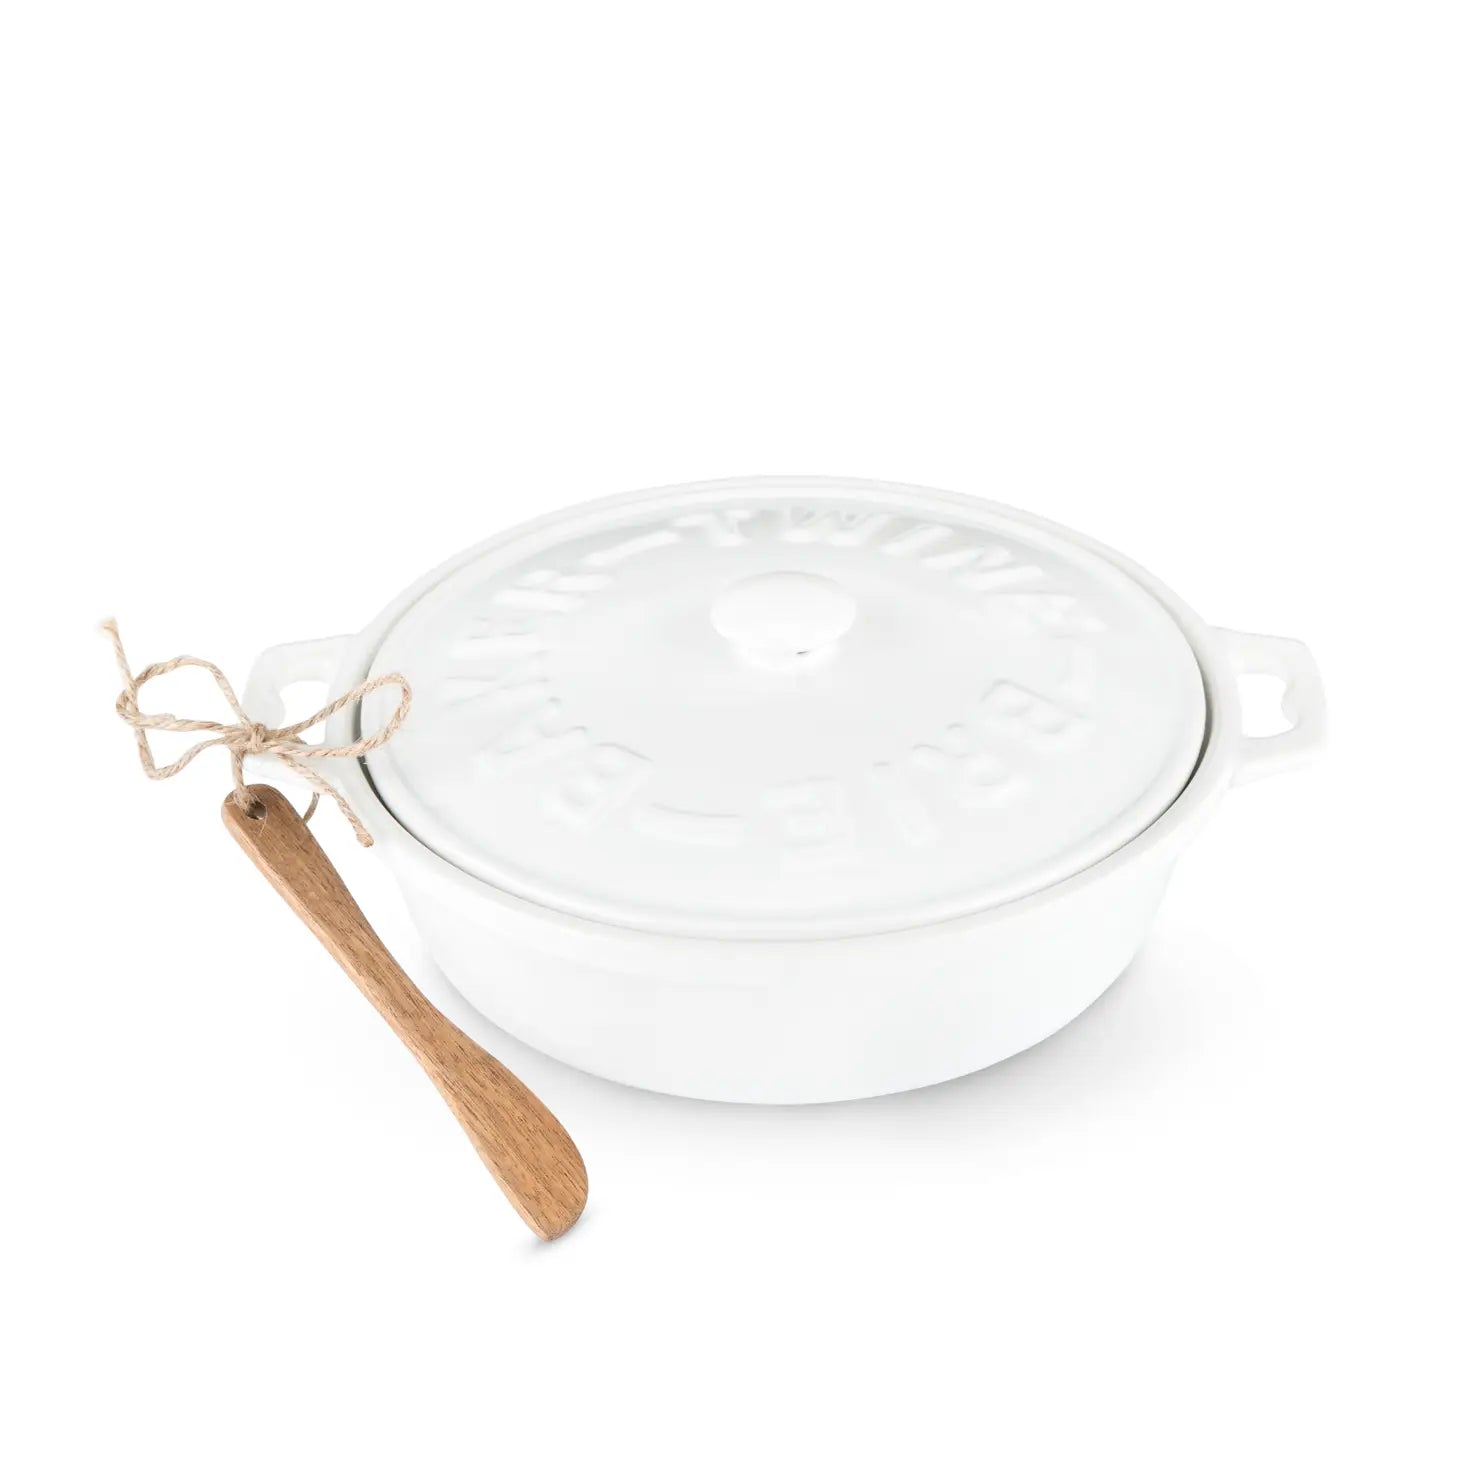 Ceramic Brie Baker with Acacia Wood Spreader